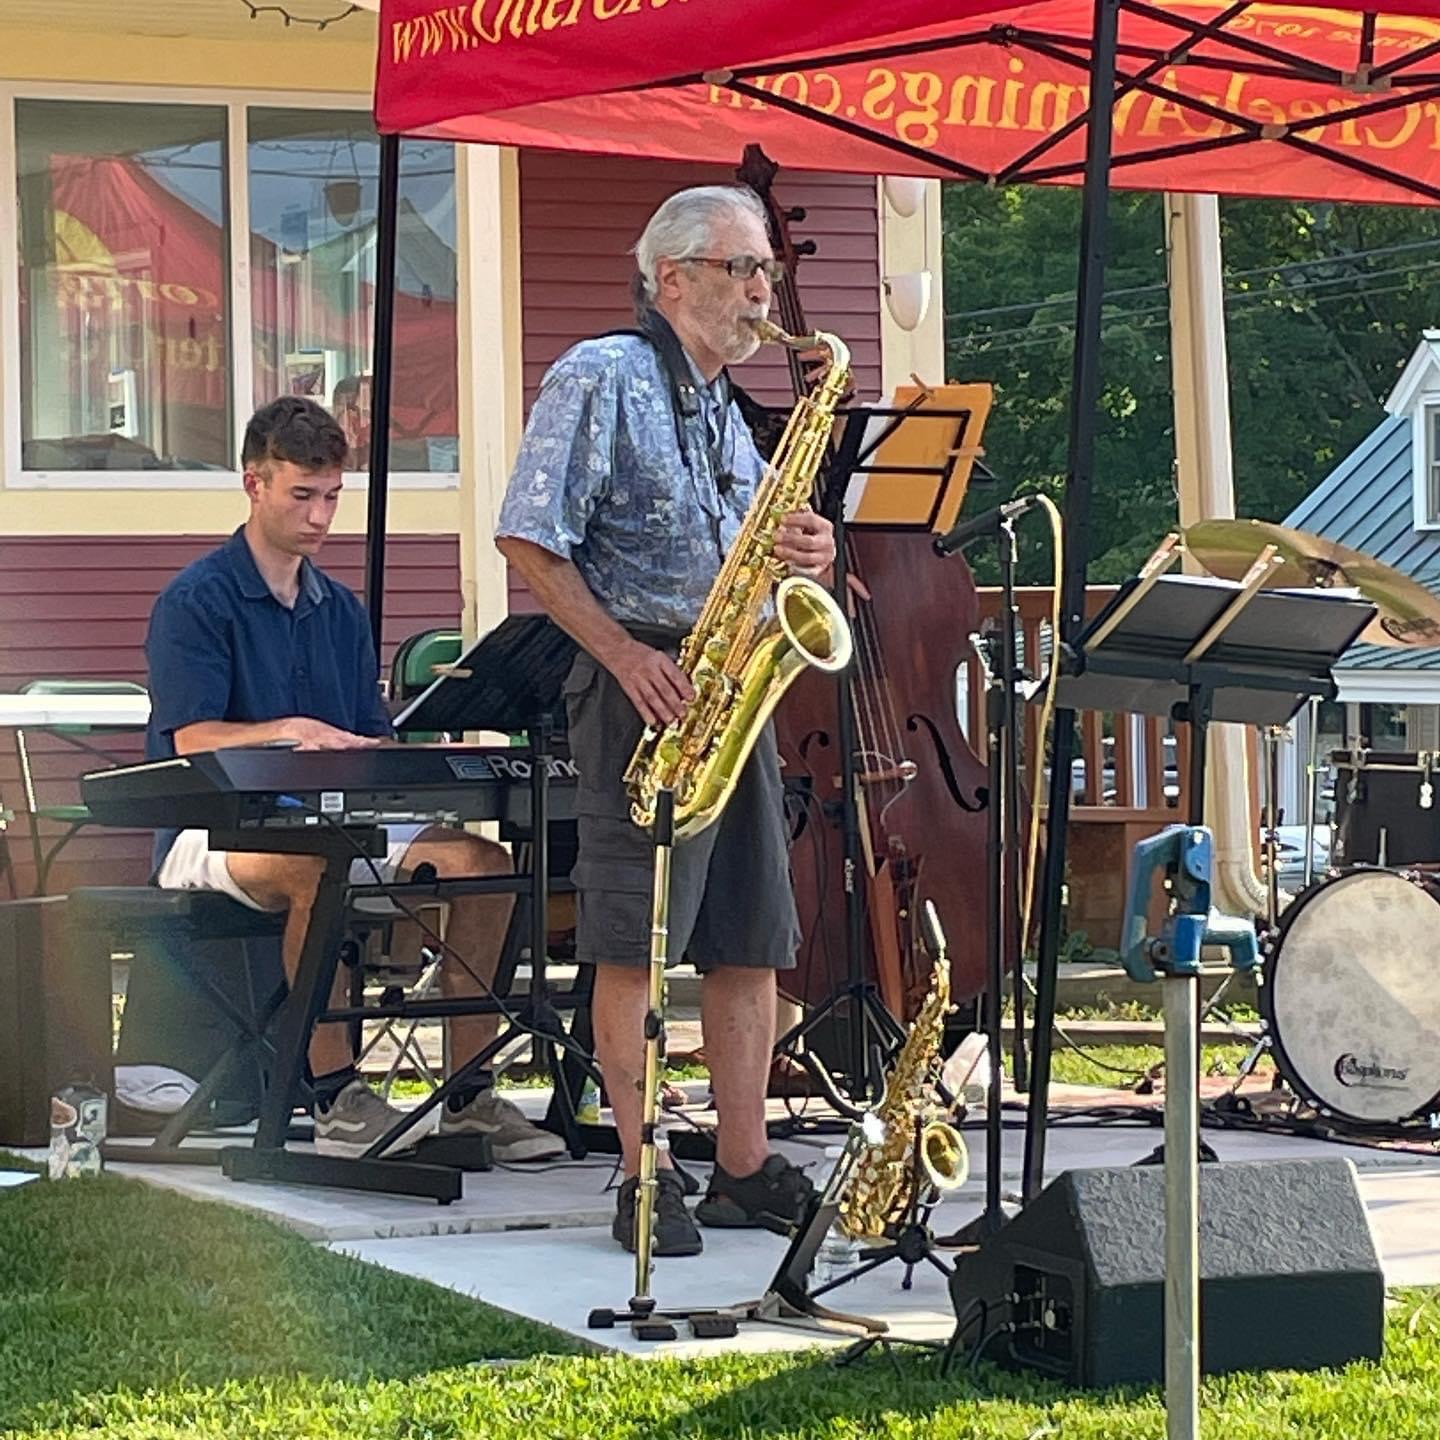 A performance at the Main Street Live Music Series in Stowe